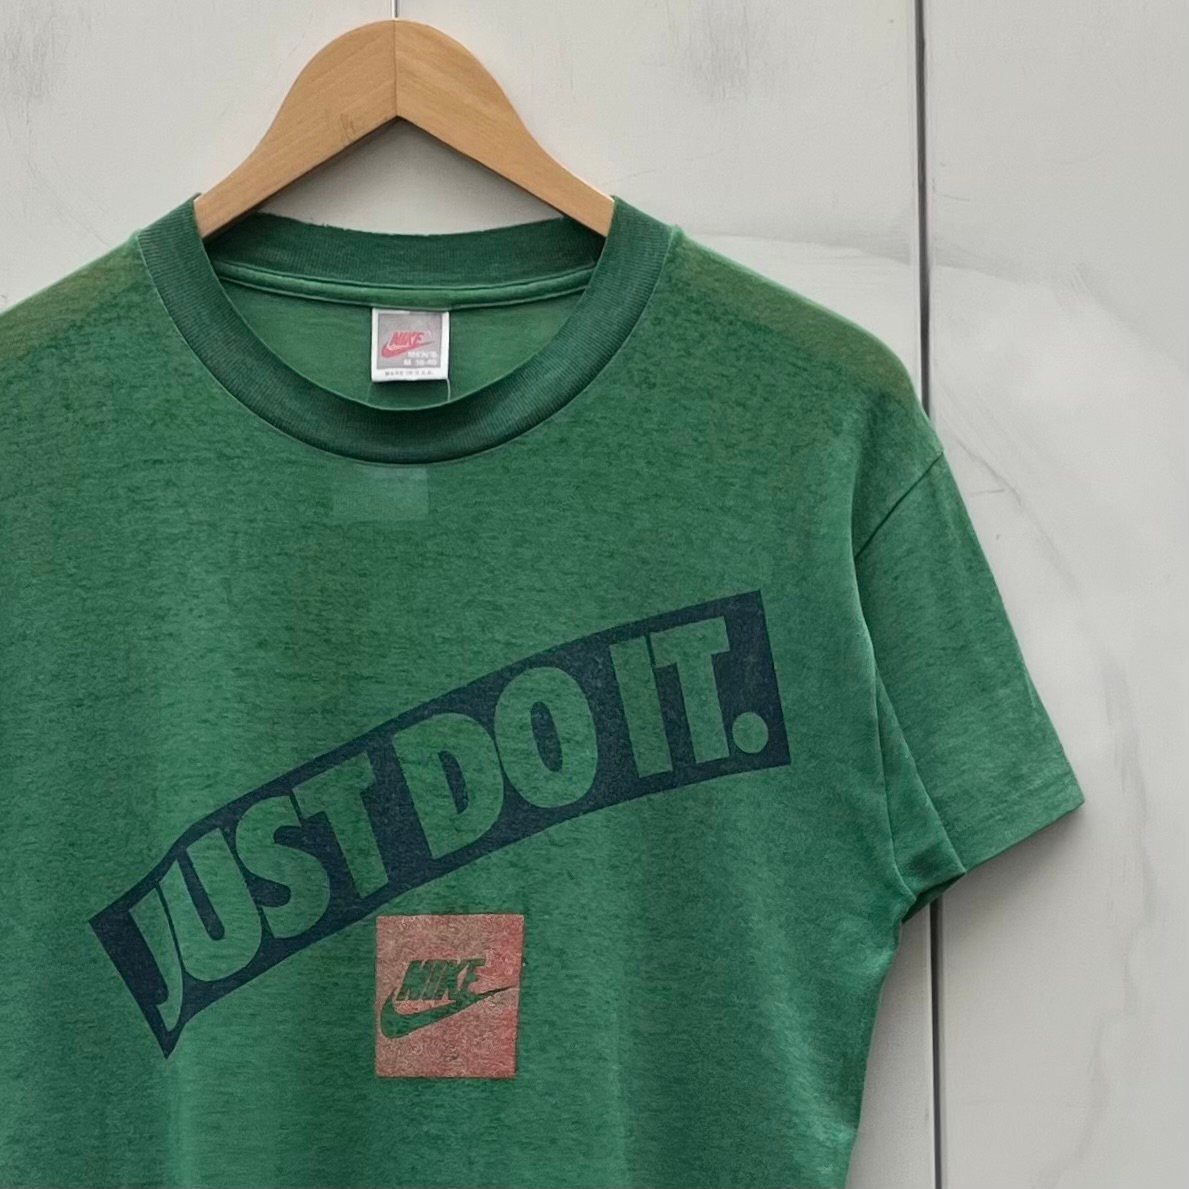 NIKE/ナイキ JUST DO IT Tシャツ 90年前後 Made in USA (USED)